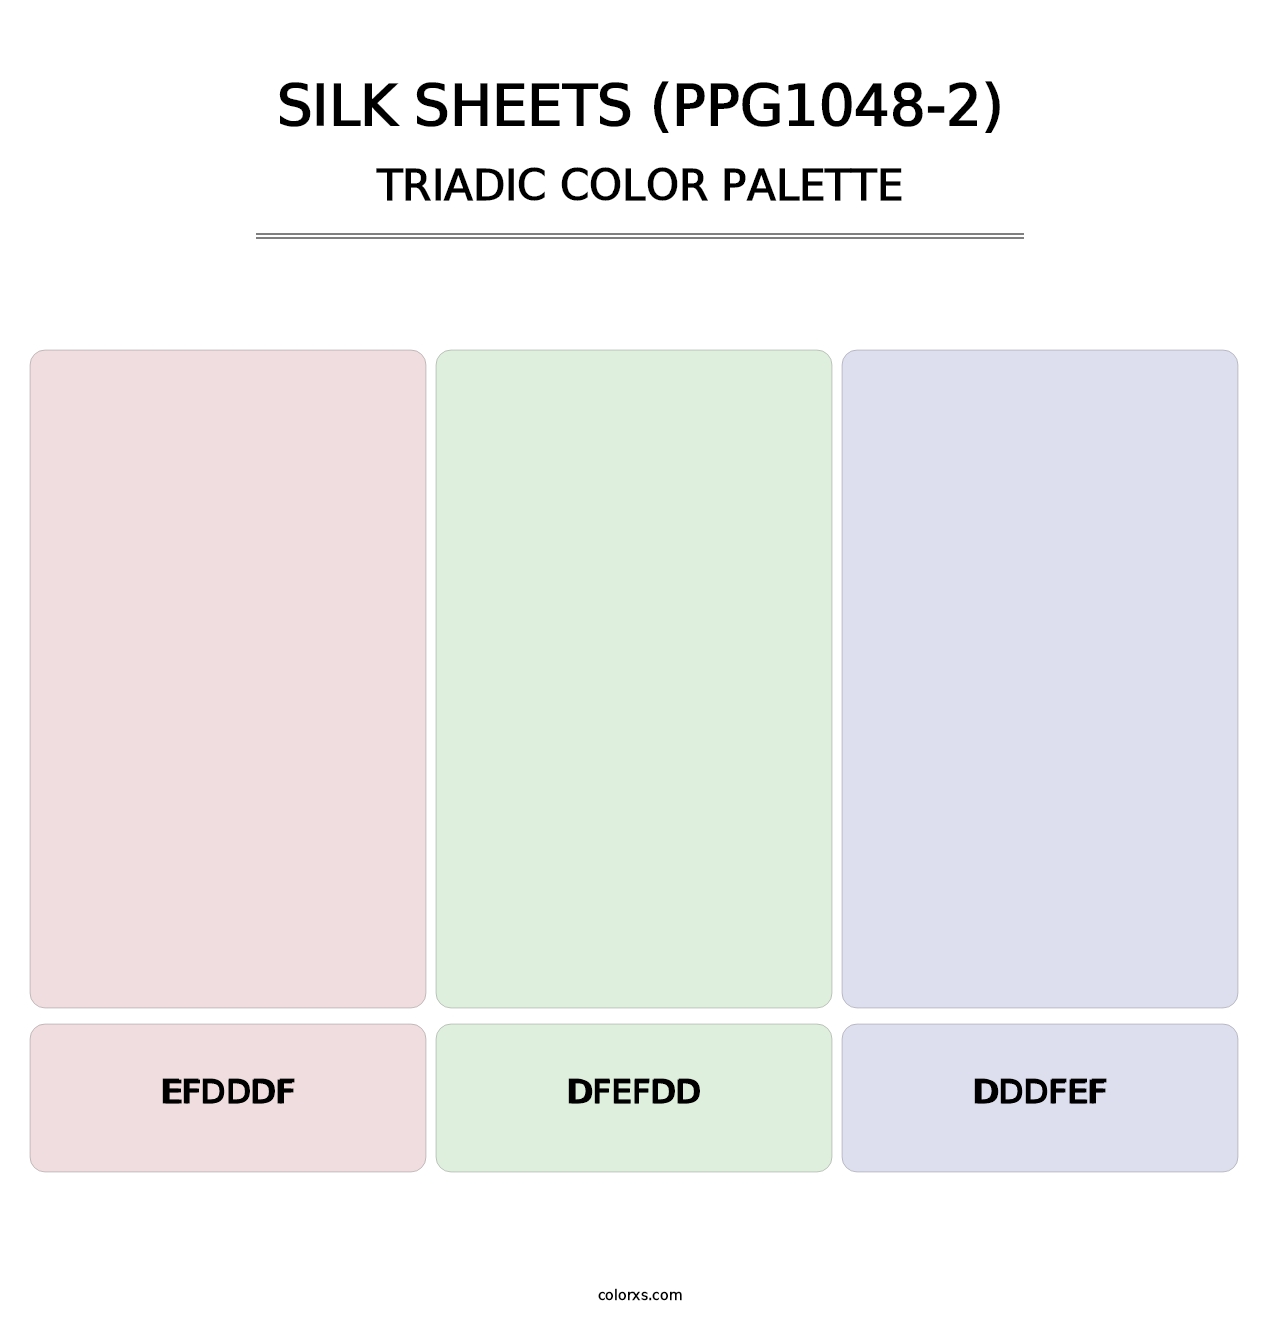 Silk Sheets (PPG1048-2) - Triadic Color Palette